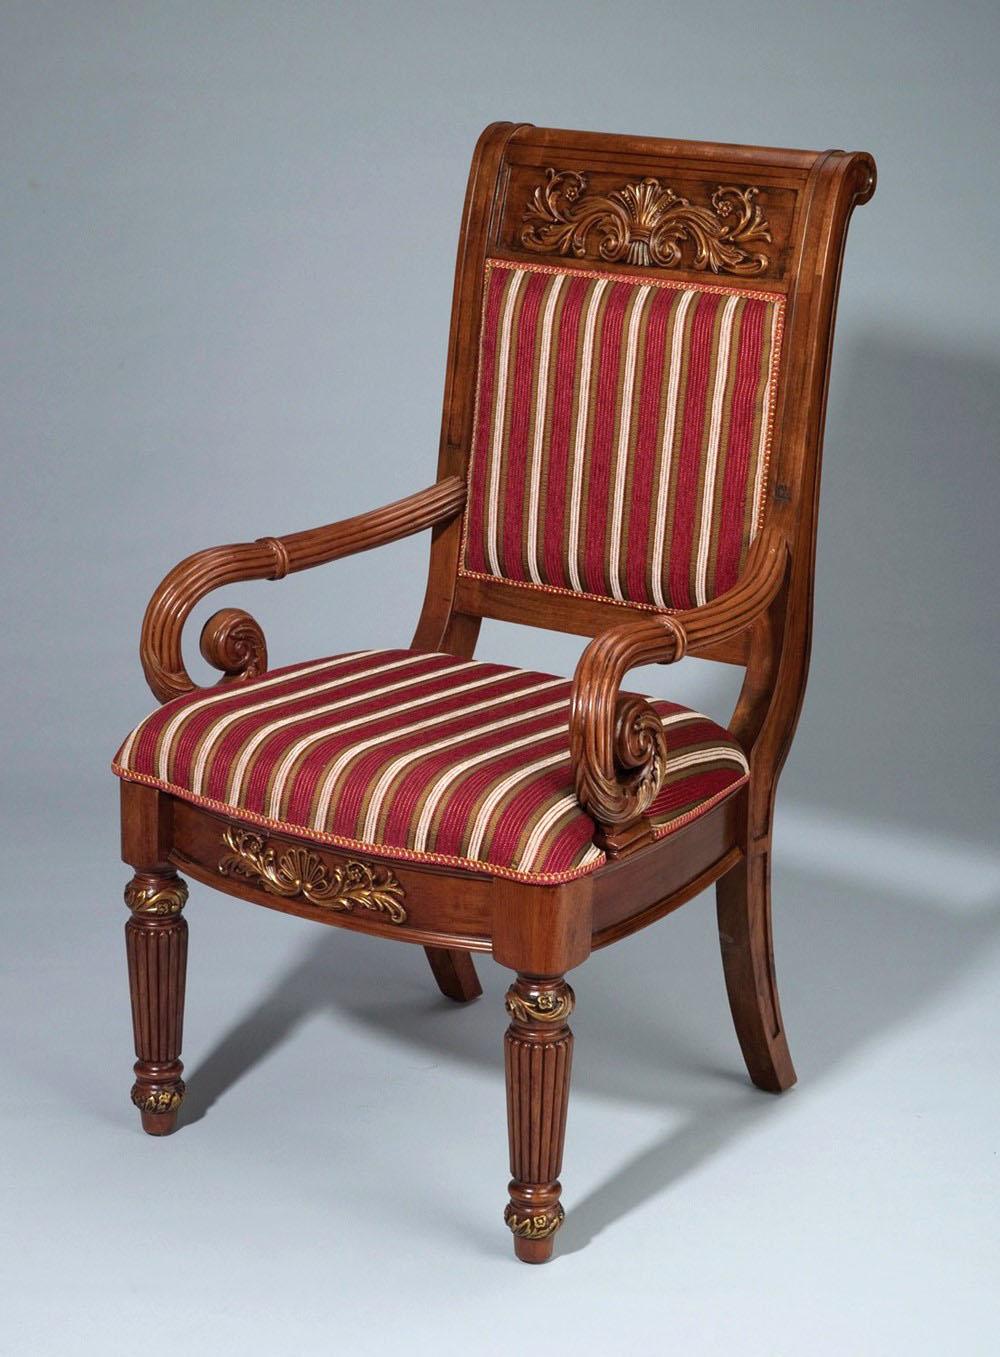 Classic, Traditional Arm Chairs 38621 AA-38621-ACH-Set-4 in Dark Brown, Multi-Color Patterned Fabric